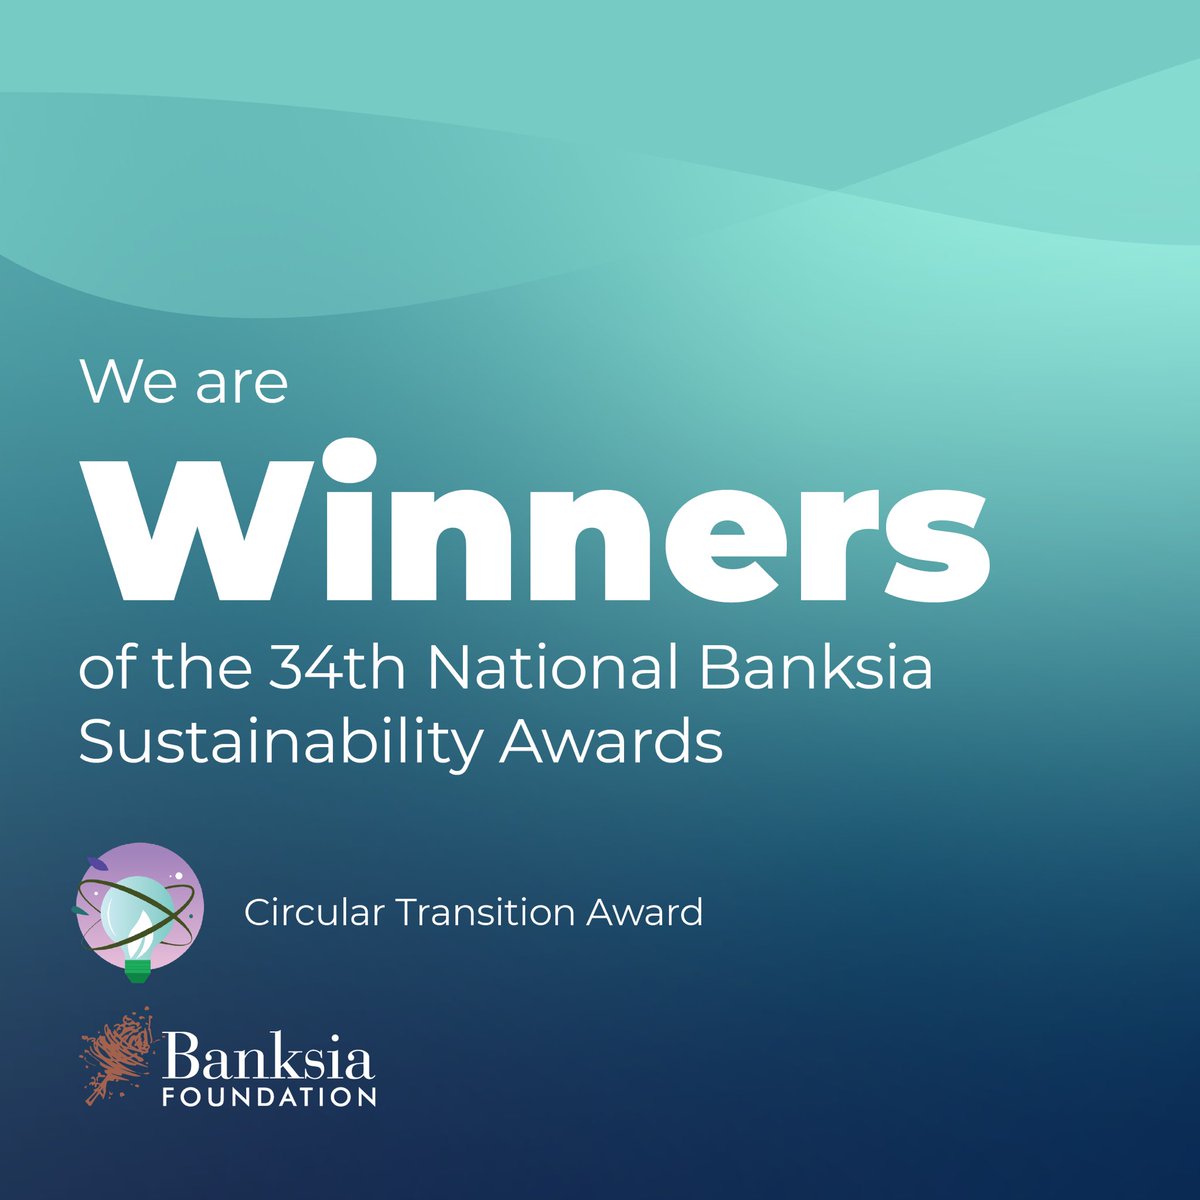 Who wants to join us in the #racetonetzero? Our team is decarbonising global industries now, reimagining carbon as a valuable resource in the transition. It’s incredible to be recognised by @BanksiaFdn and the judges involved in the 34th National Banksia Sustainability Awards.